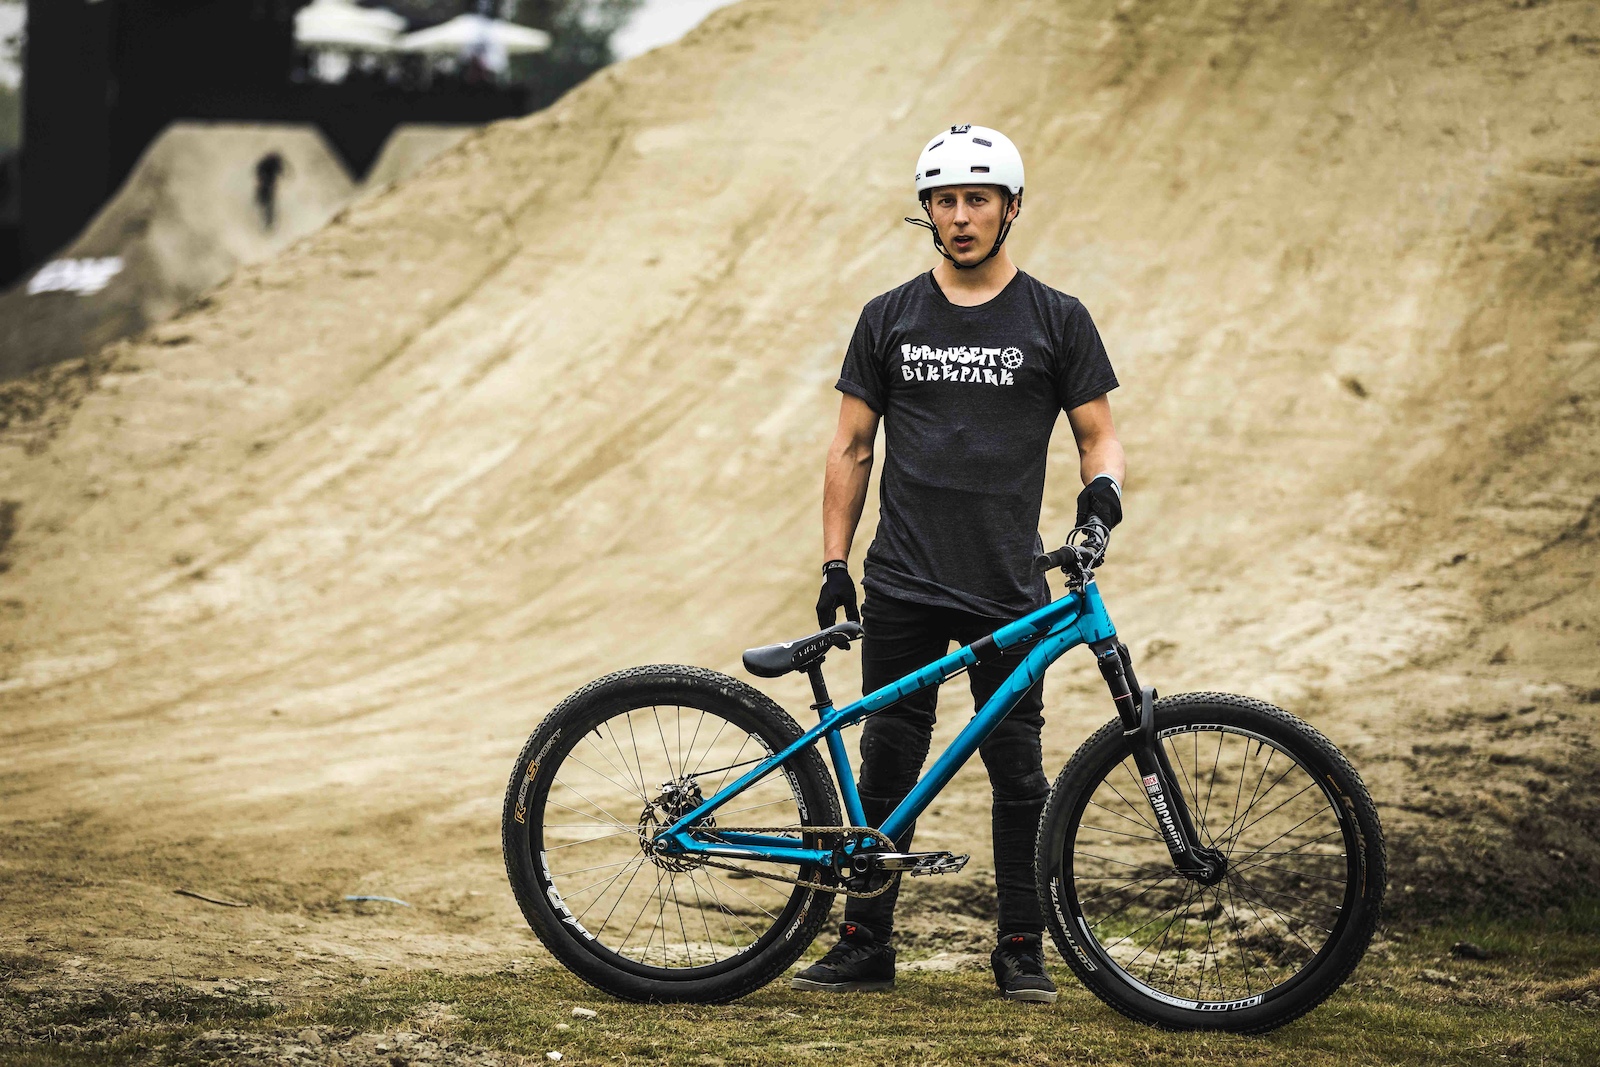 Coming through with one of my favourite colour schemes of the week... and also third place yesterday Alex Alanko and his Canyon Stiched 360 Pro.